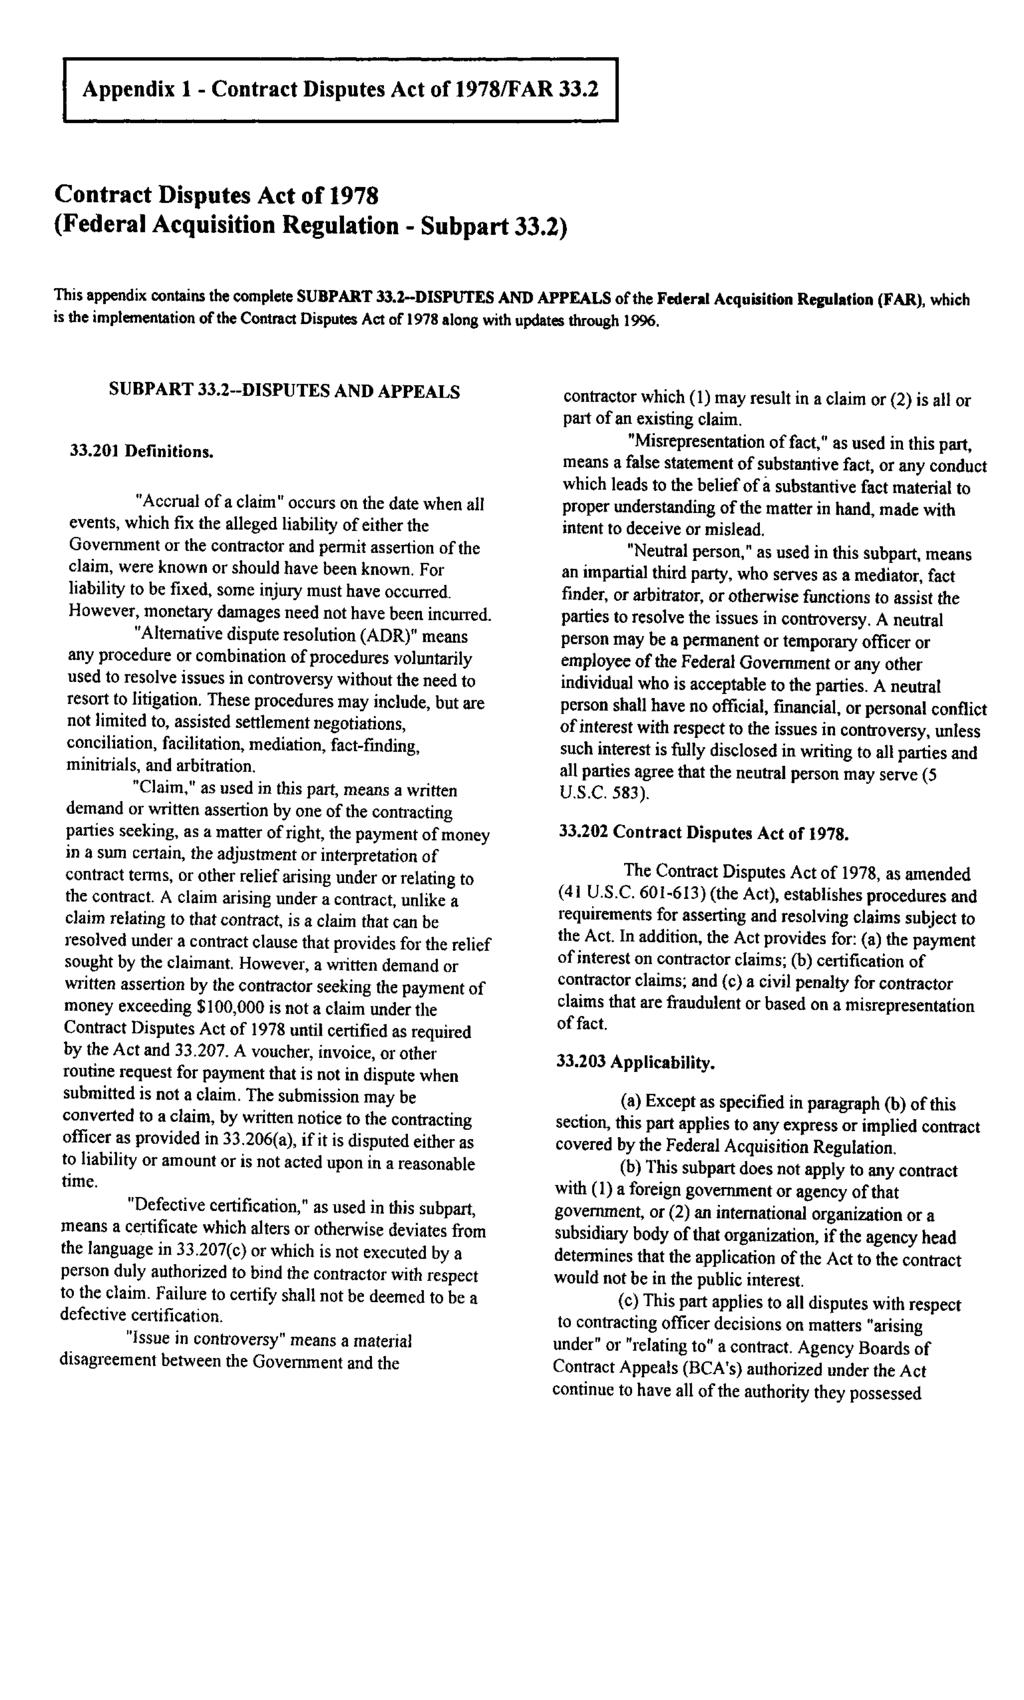 Appendix 1 - Contract Disputes Act of 1978/FAR 33.2 Contract Disputes Act of 1978 (Federal Acquisition Regulation - Subpart 33.2) This appendix contains the complete SUBPART 33.